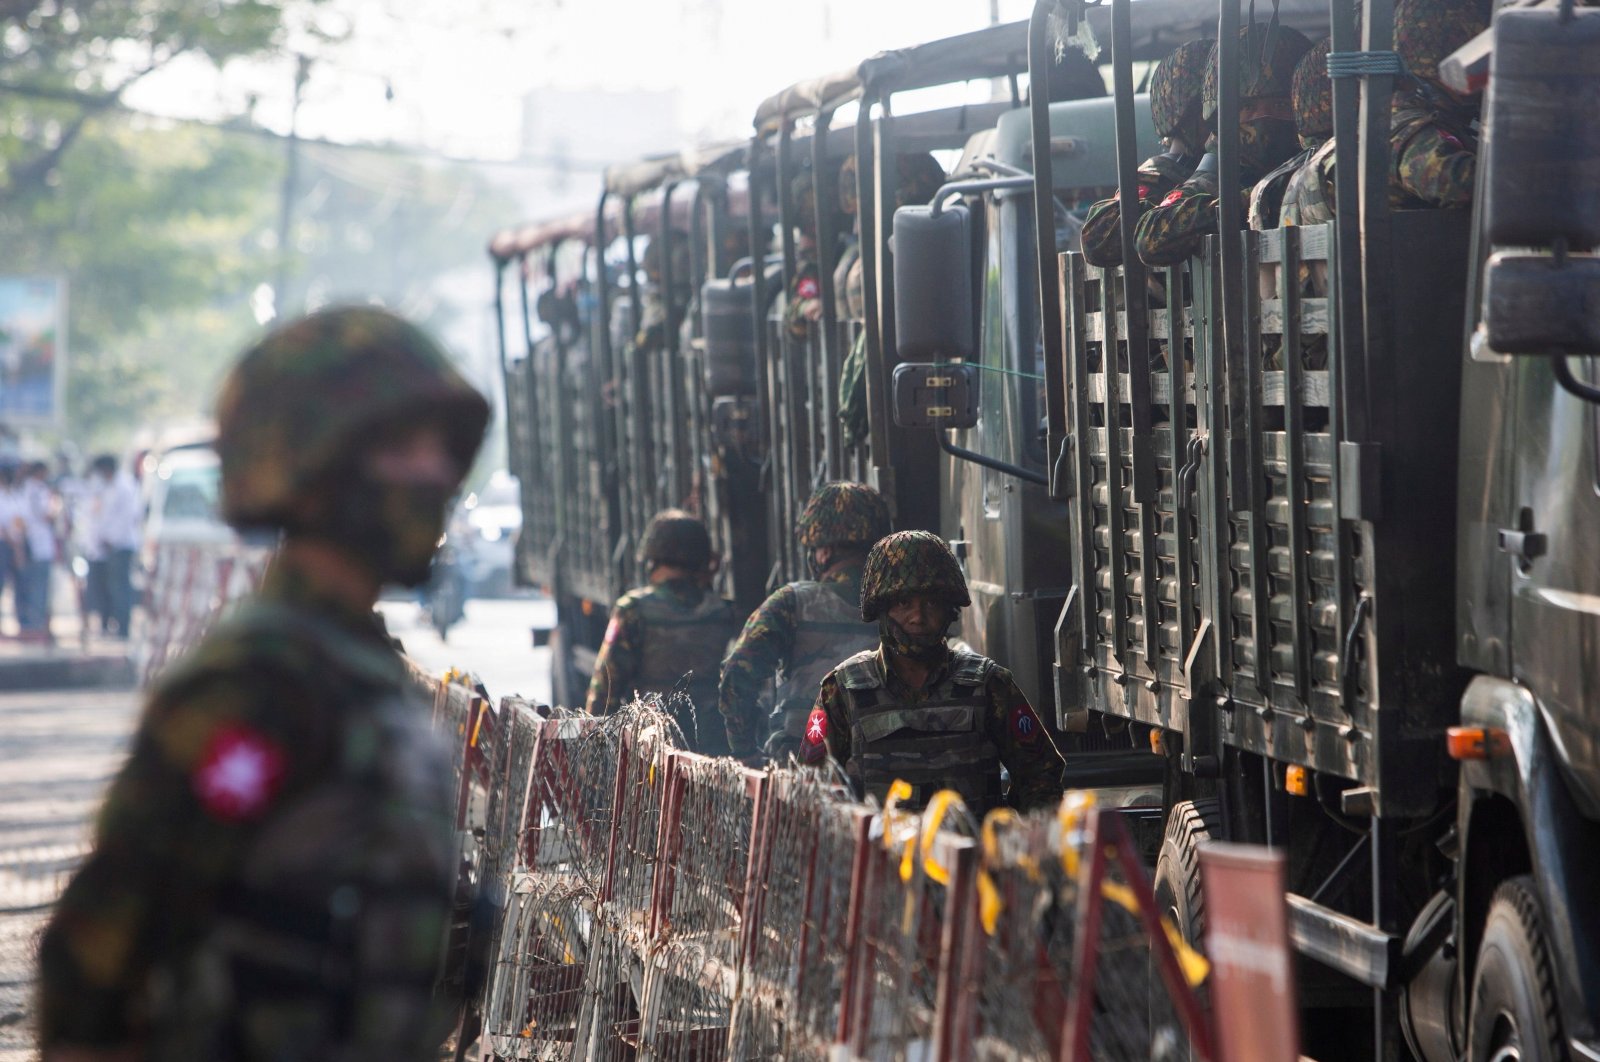 Soldiers stand next to military vehicles as people gather to protest against the military coup, in Yangon, Myanmar, February 15, 2021. (Reuters Photo)